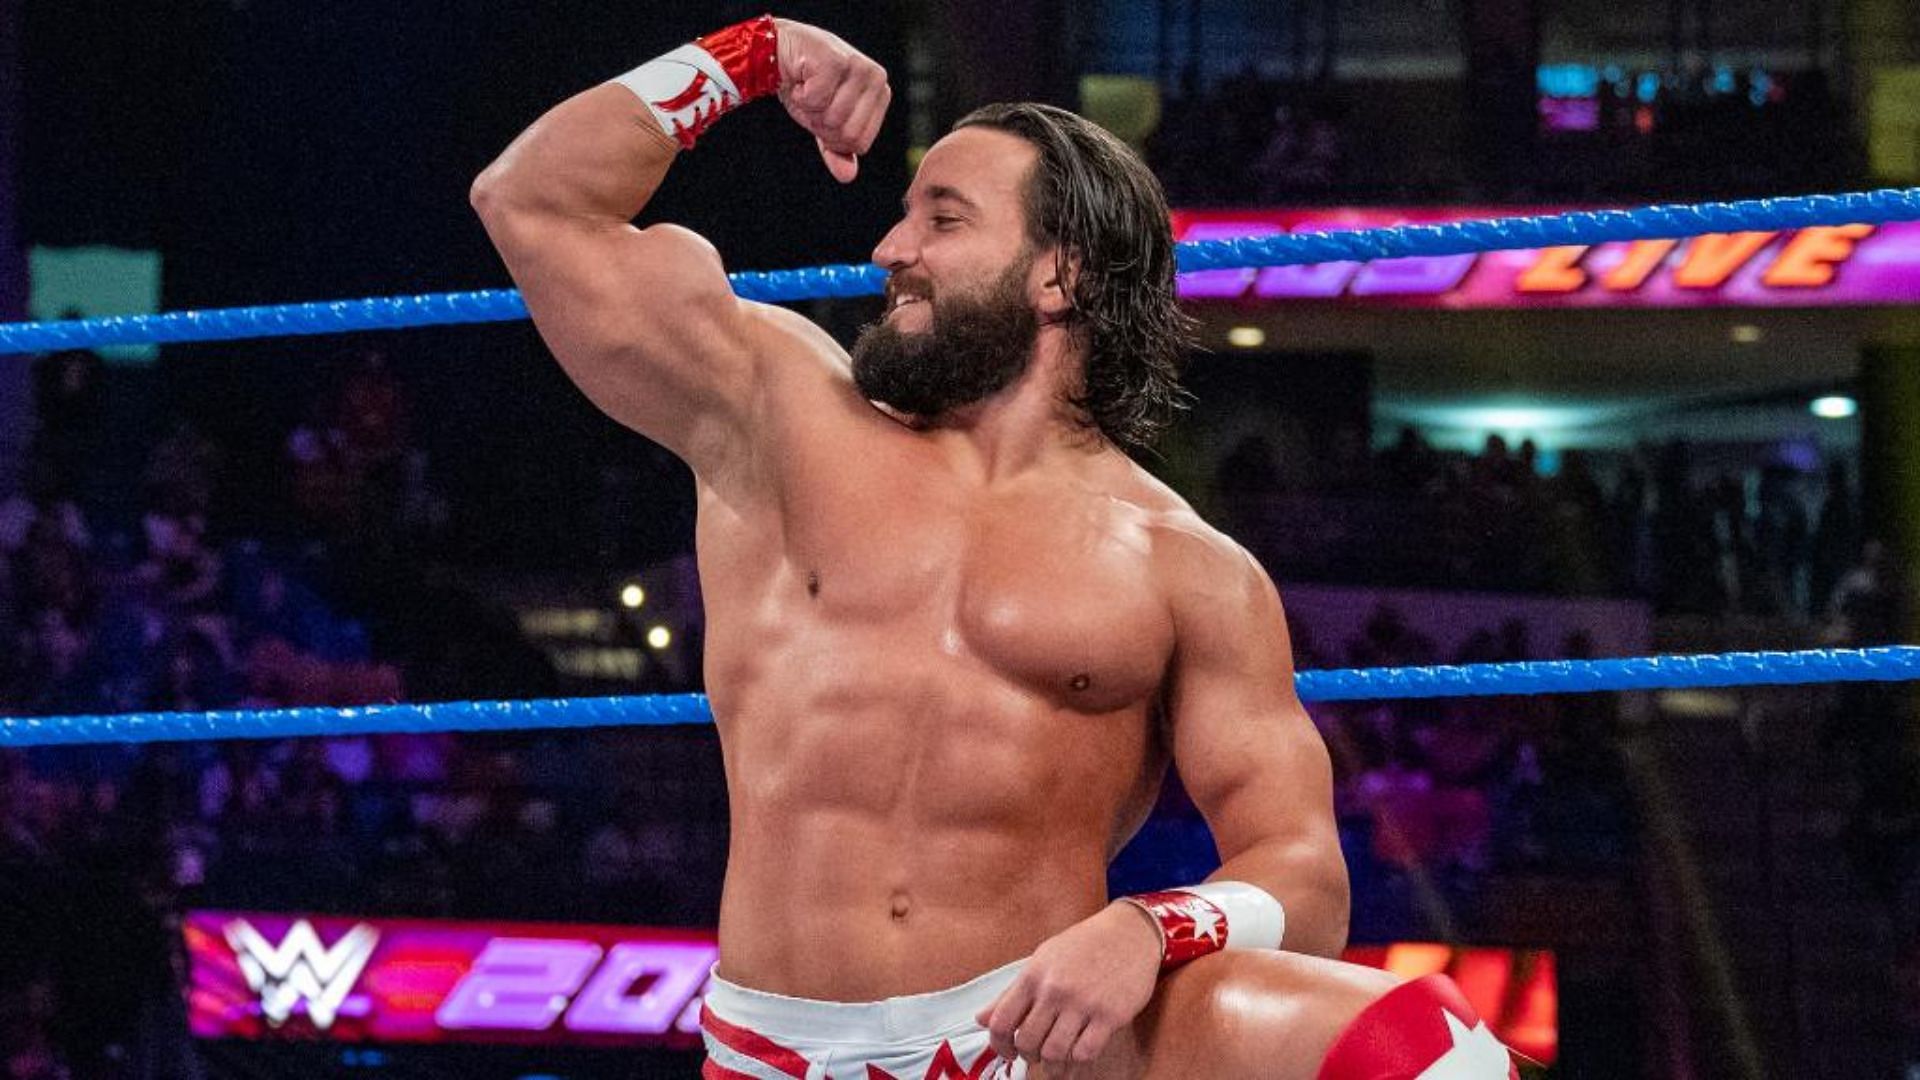 Tony Nese on where 205 Live went wrong.